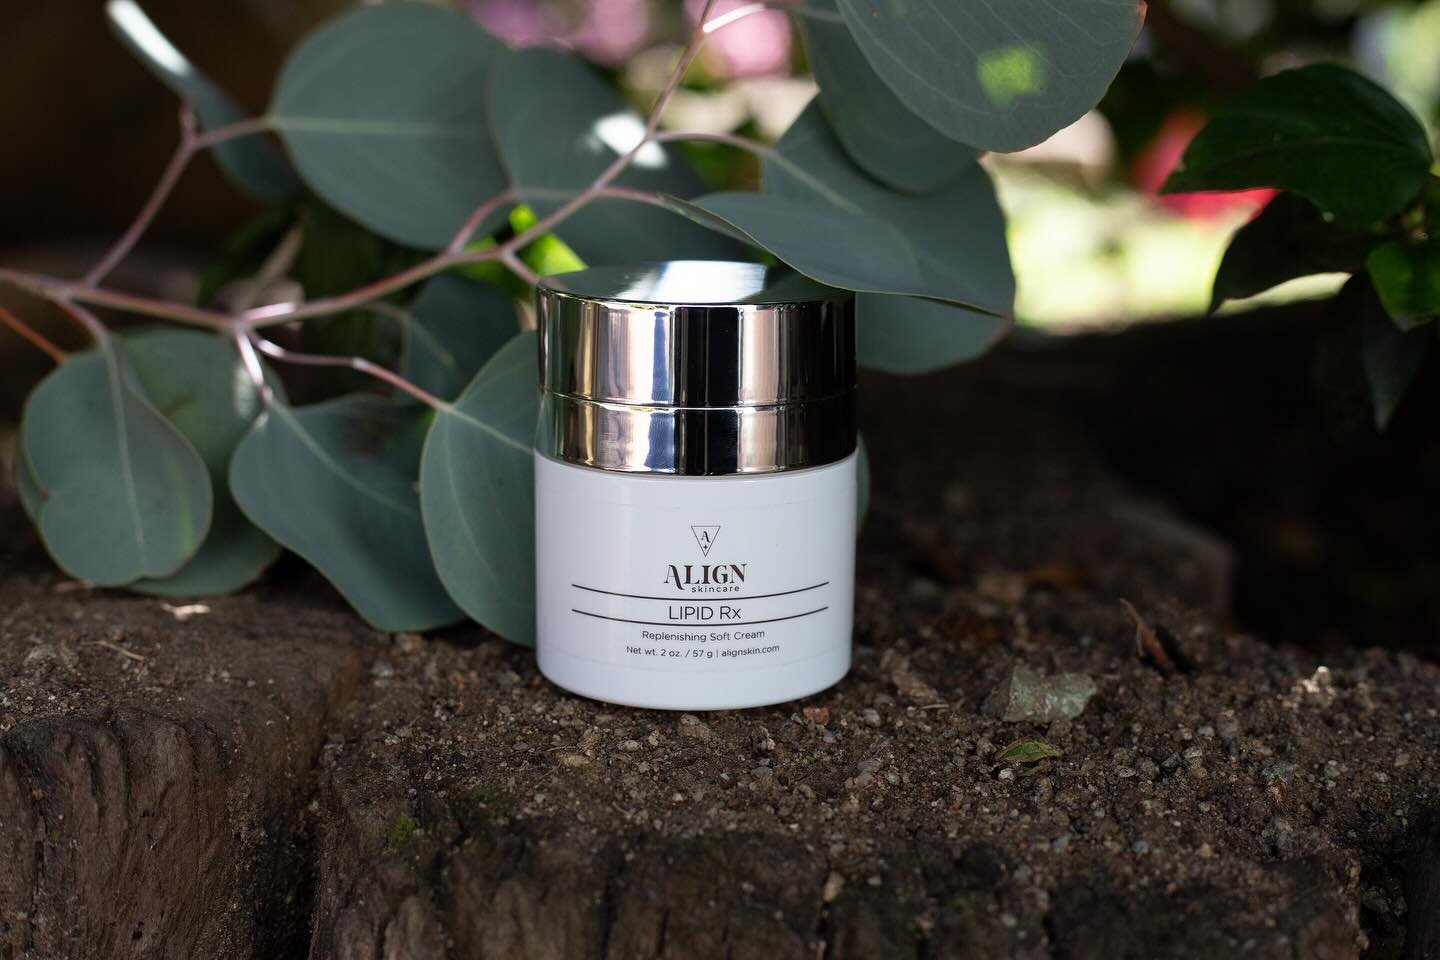 ELASTICITY and TEXTURE of your skin is greatly improved with this product!
💦LIPID RX💦
Moisturizer that contains lipids to provide essential nourishment to help replenish the upper layers of the skin barrier while natural humectants lock in moisture